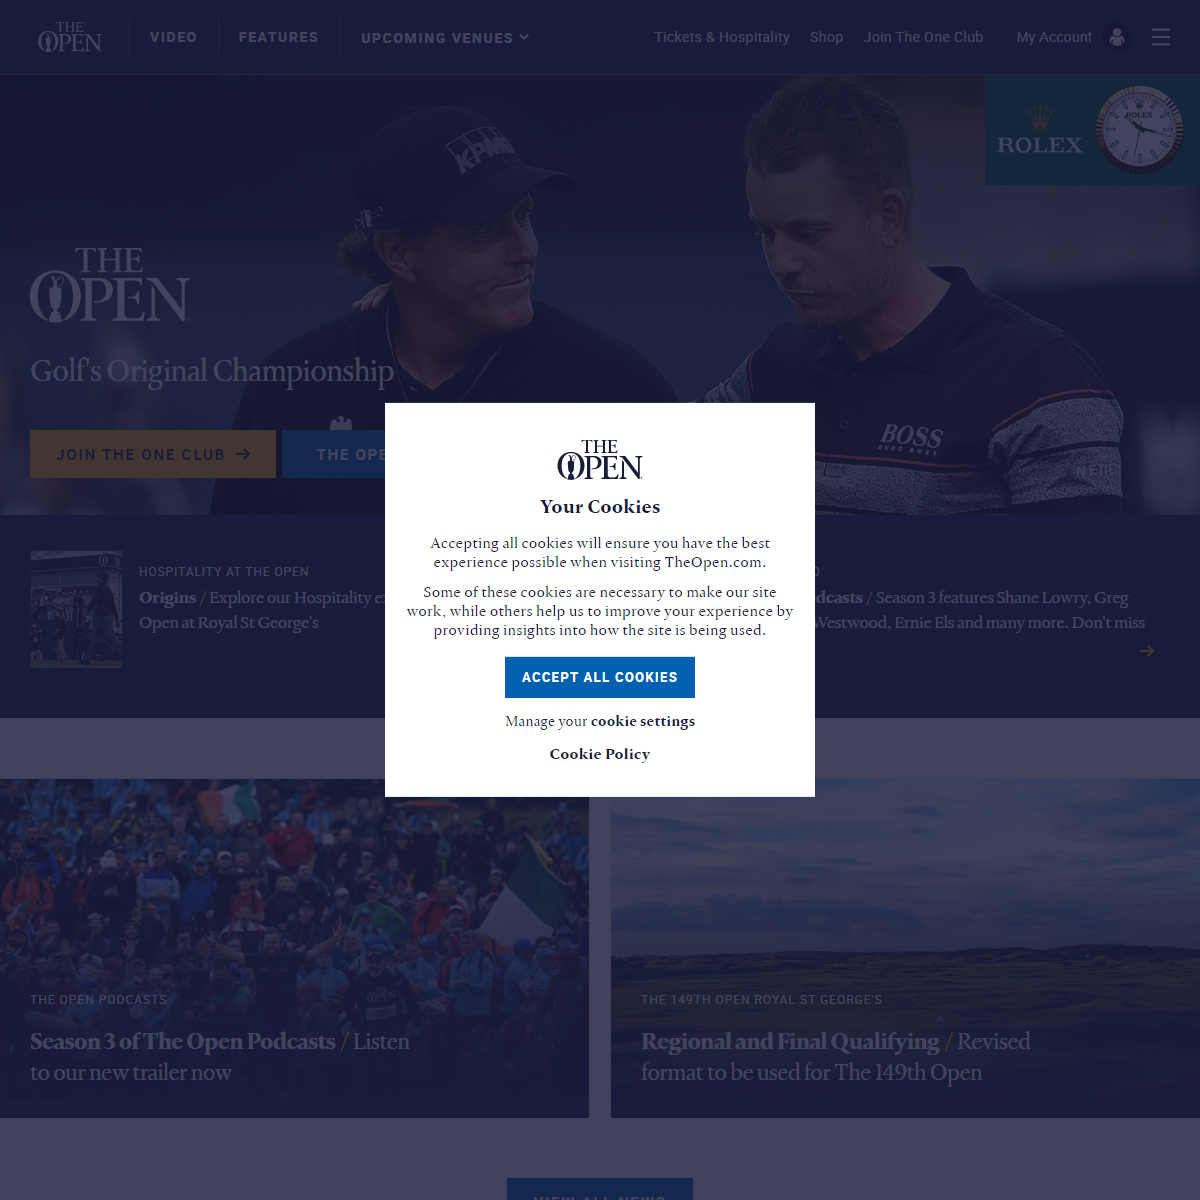 A complete backup of https://www.theopen.com/